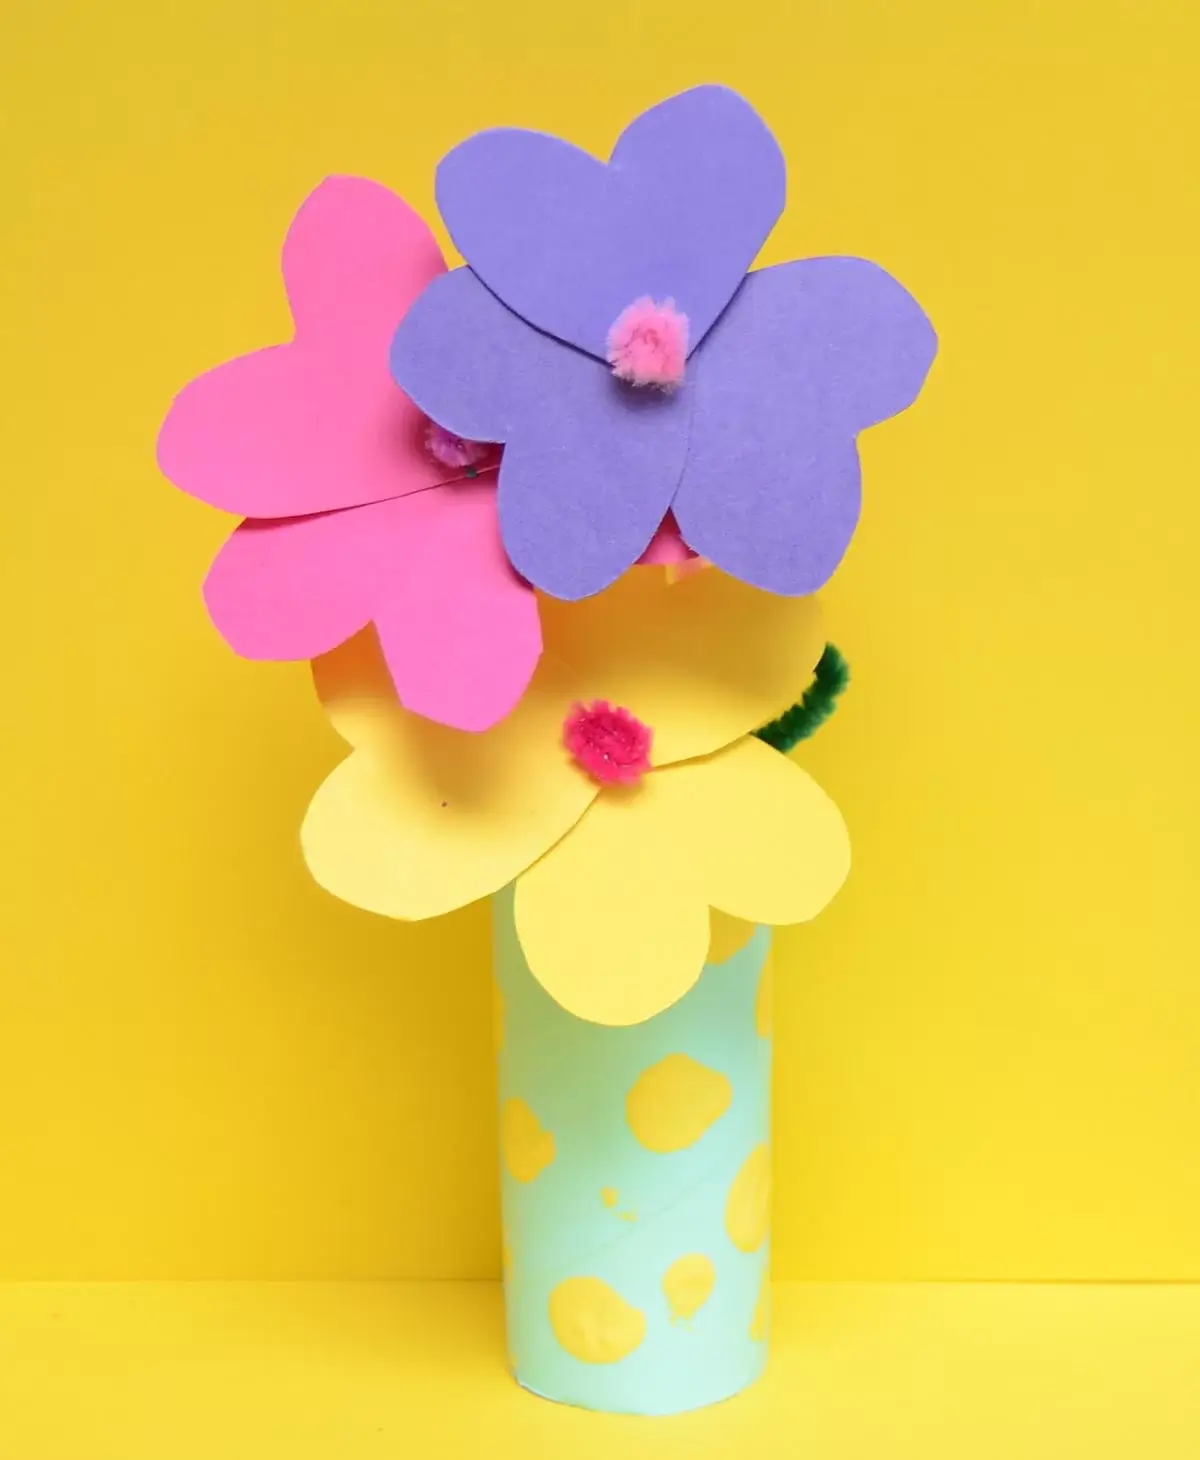 Flower Vase Toilet Paper Roll Craft Idea For Toddlers